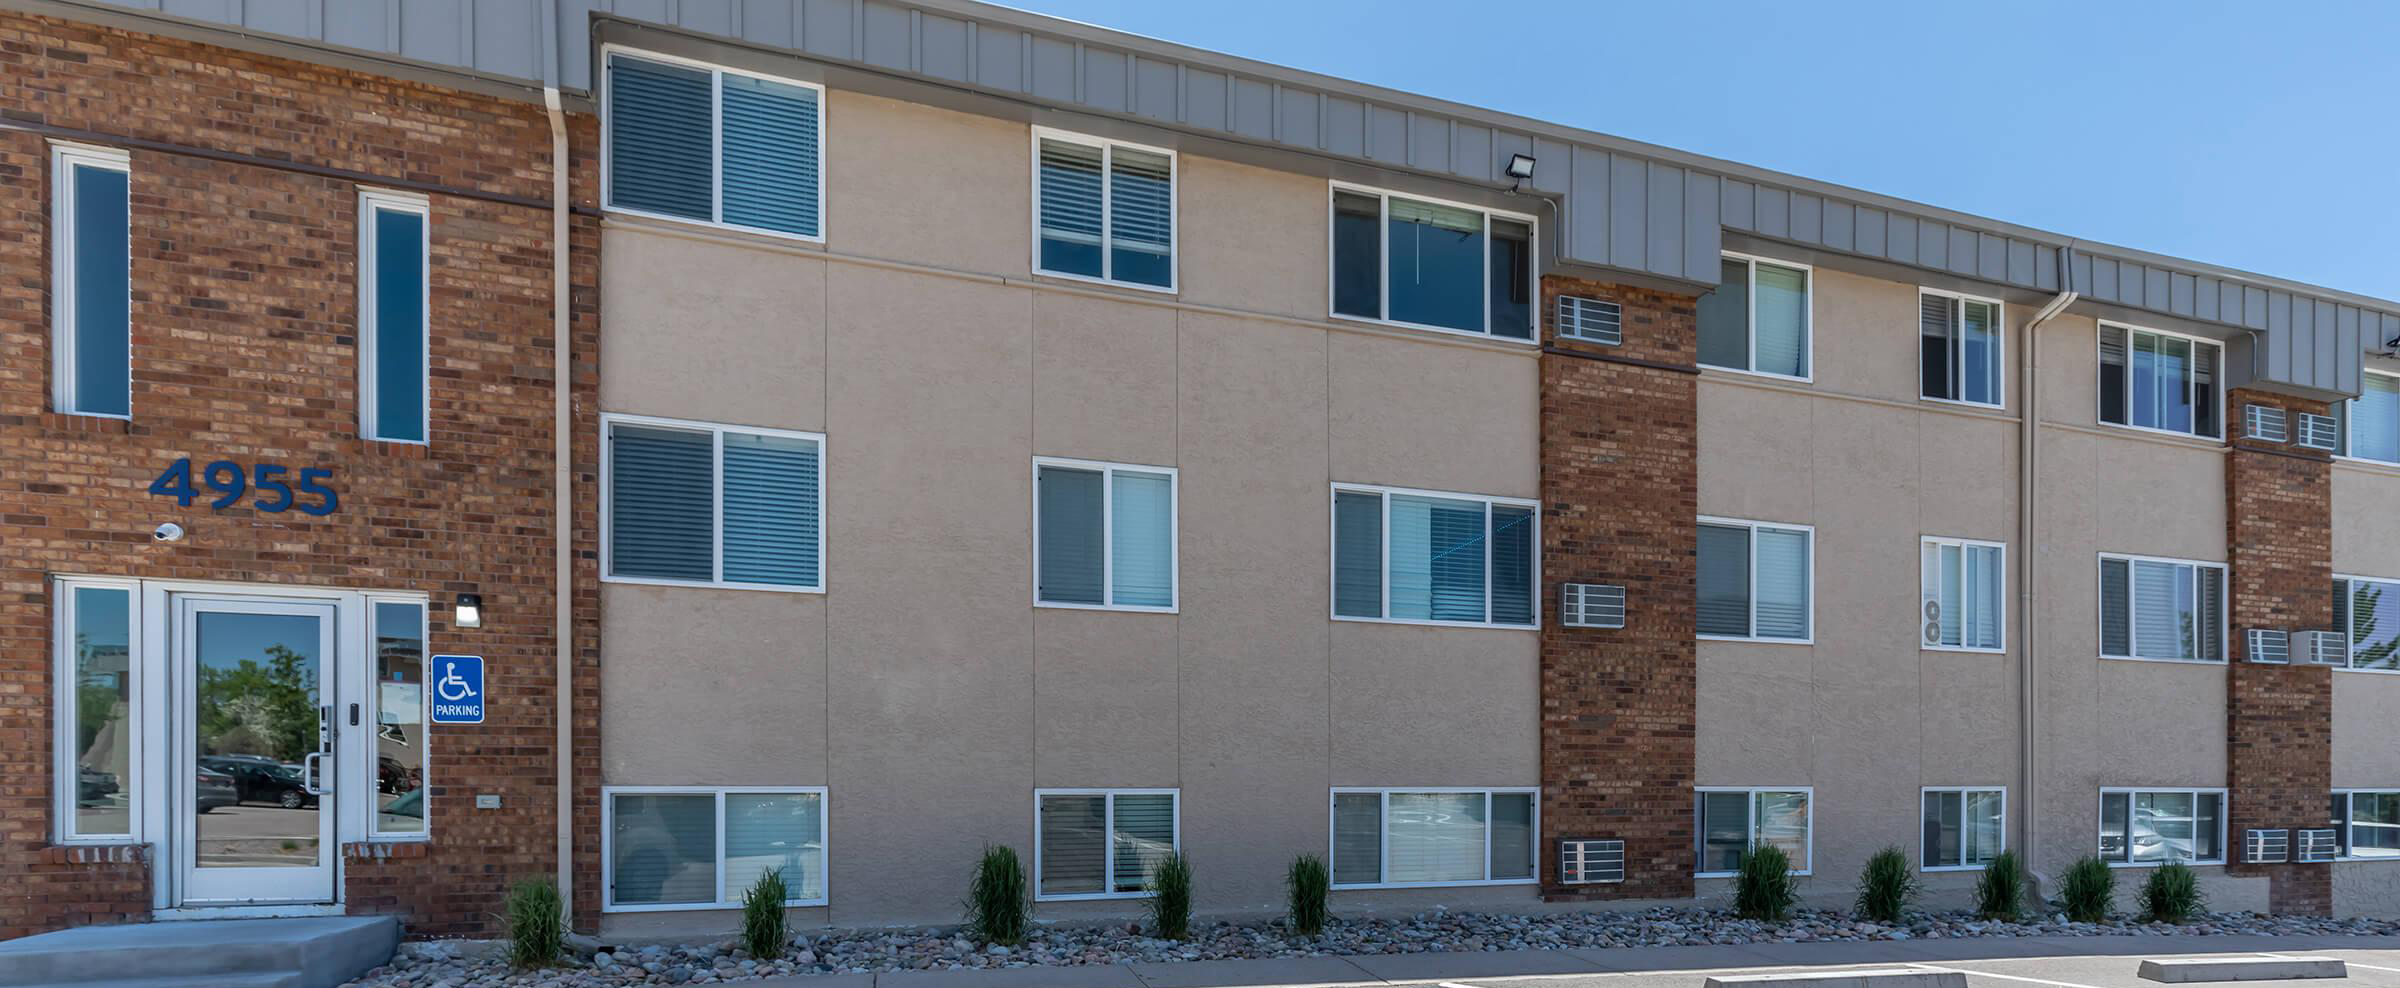 On site parking at North 49 Apartments, located in Colorado Springs, CO